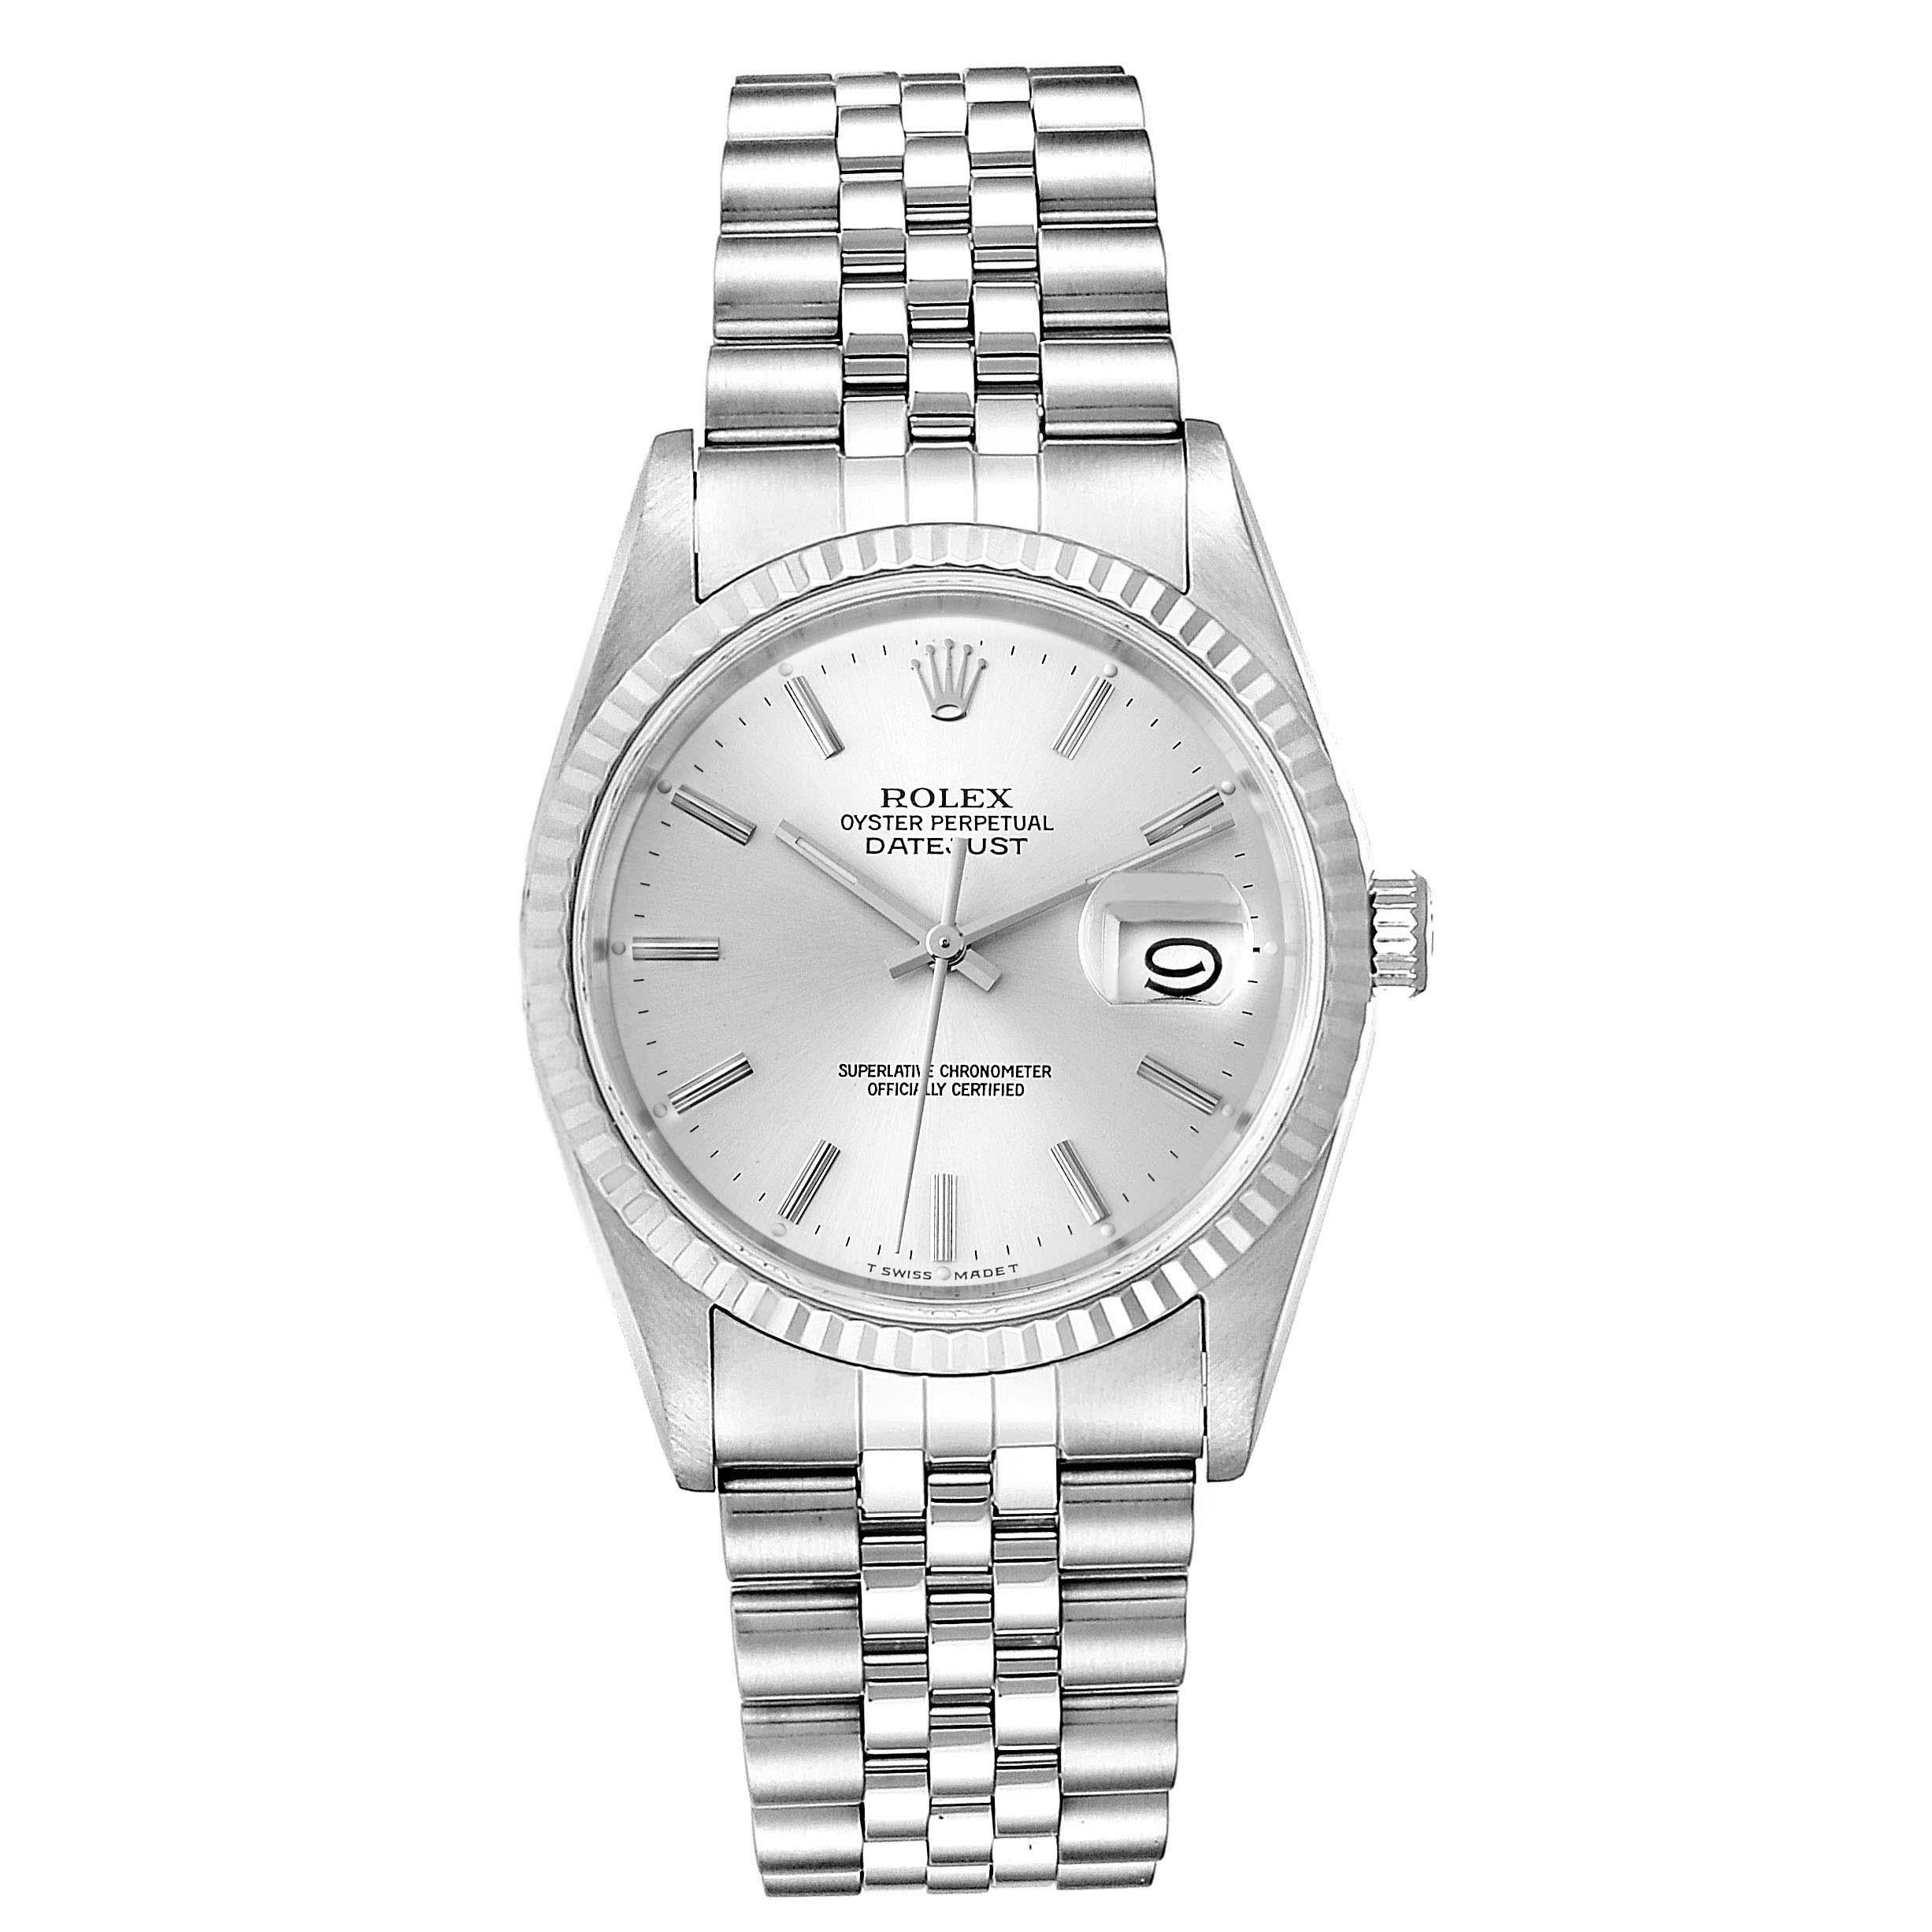 Rolex Datejust Silver Dial Fluted Bezel Steel White Gold Mens Watch 16234. Officially certified chronometer self-winding movement. Stainless steel oyster case 36 mm in diameter. Rolex logo on a crown. 18k white gold fluted bezel. Scratch resistant